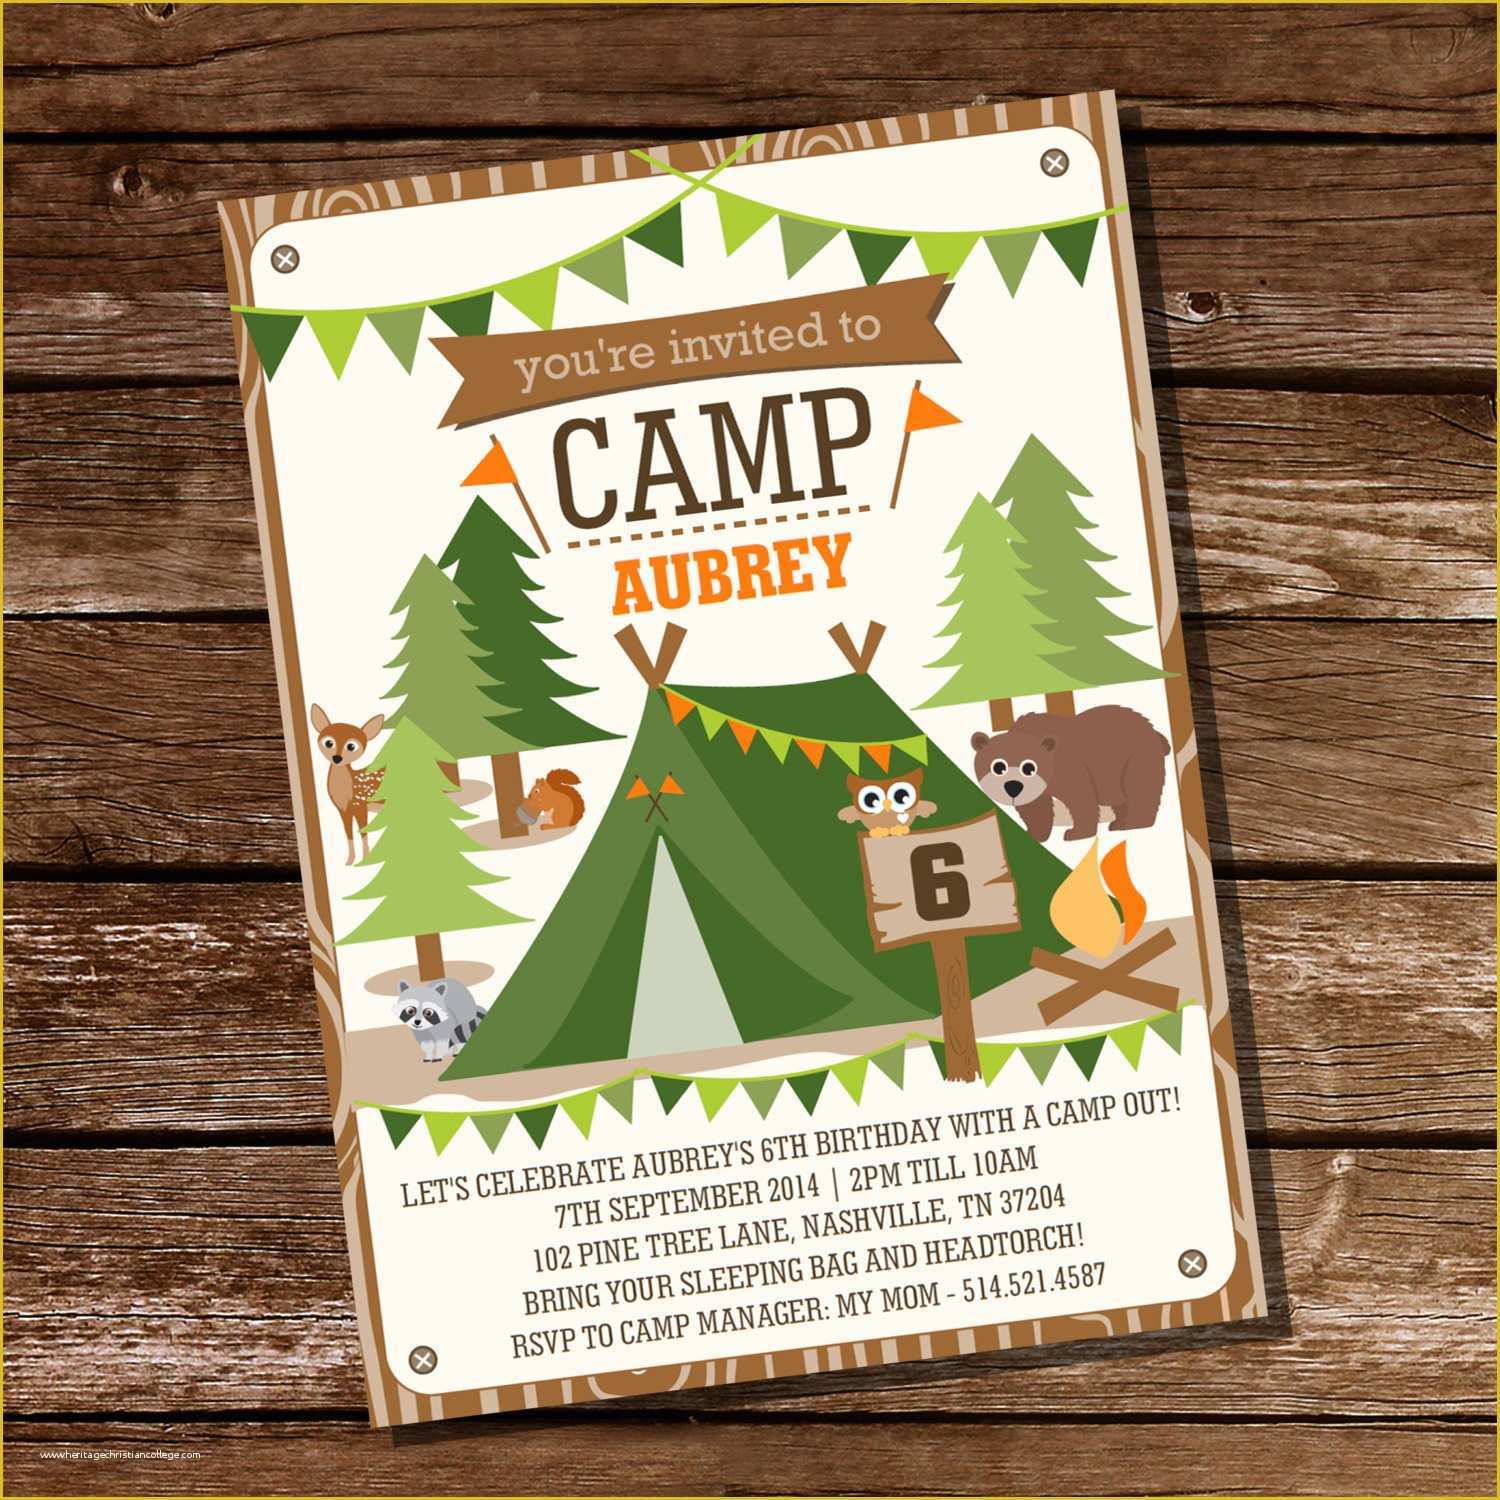 Camping Invitations Templates Free Of Camping Tent Party Invitation for Boys and Girls Camp Out